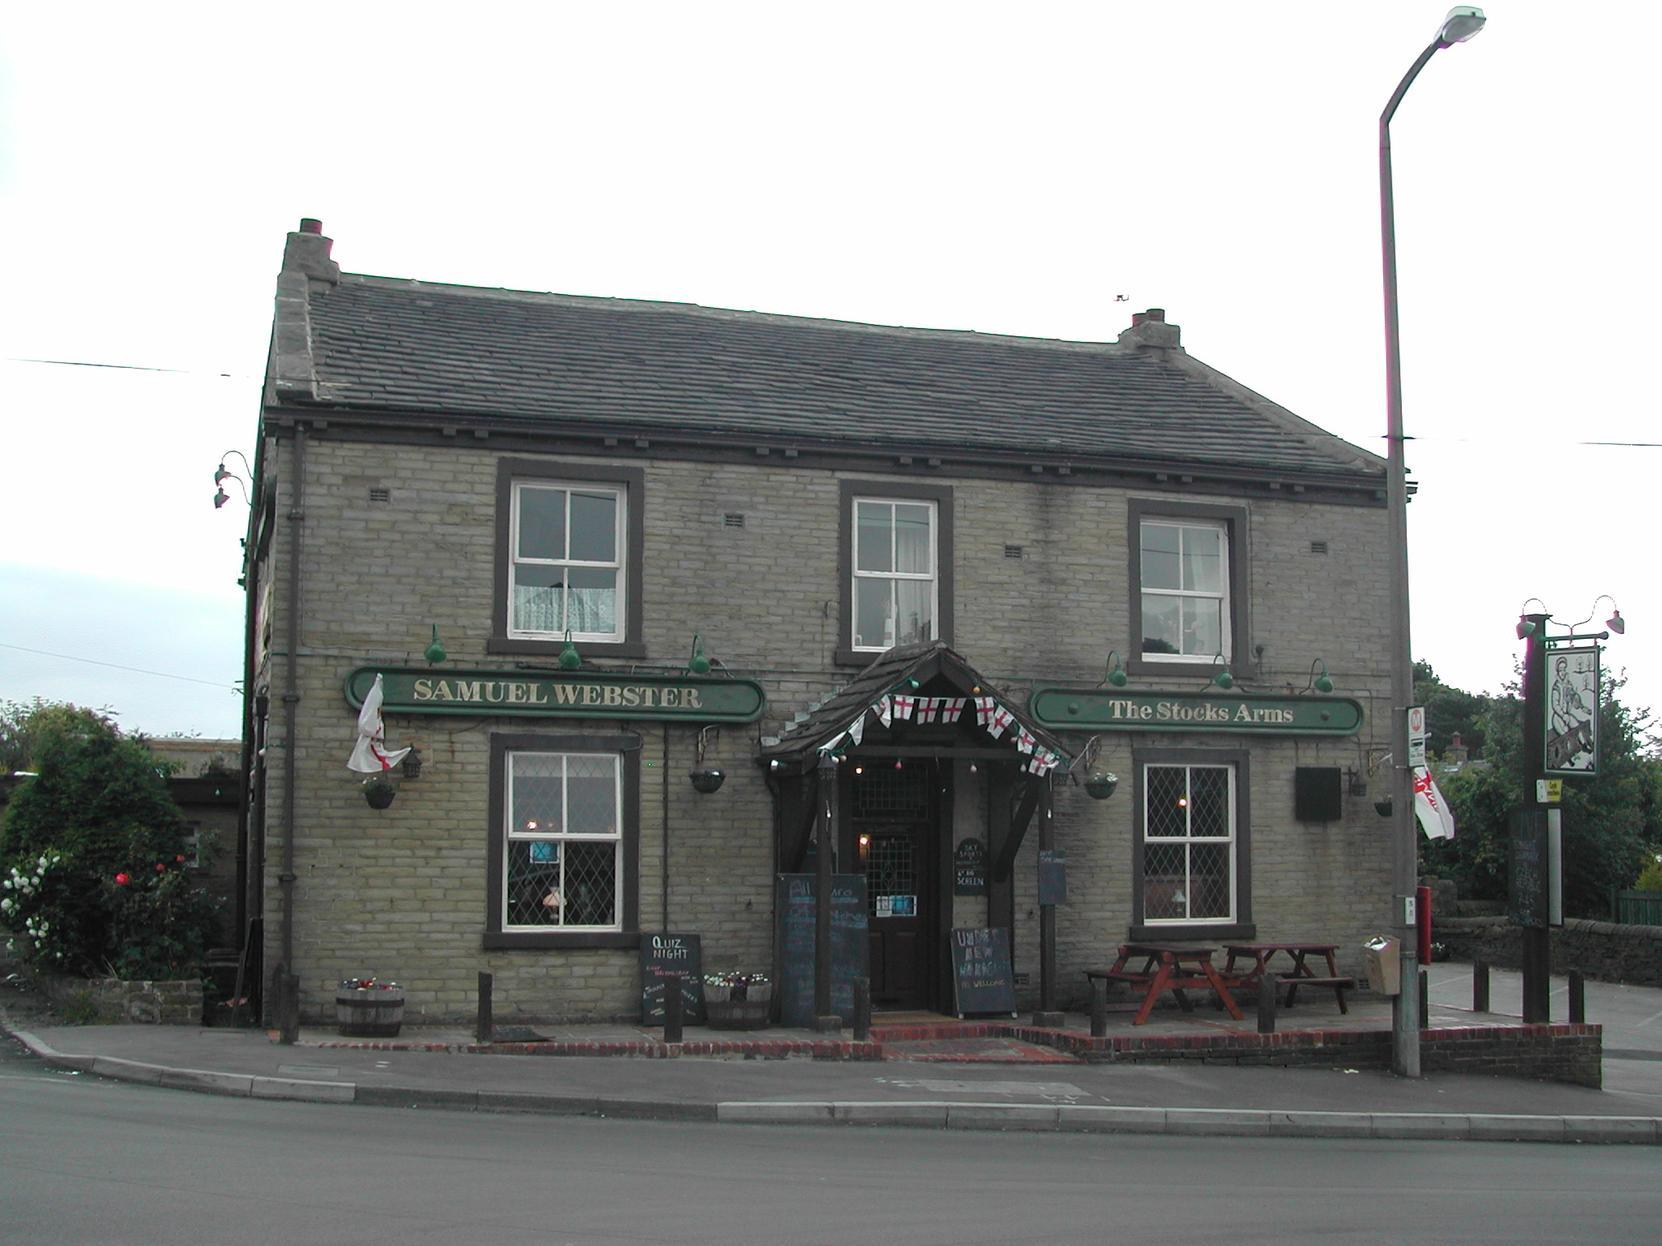 The Stocks Arms on Bradford Road in Northowram took its name from the Stocks family and closed back in 2009. The building is now home to popular restaurant 22 The Square.